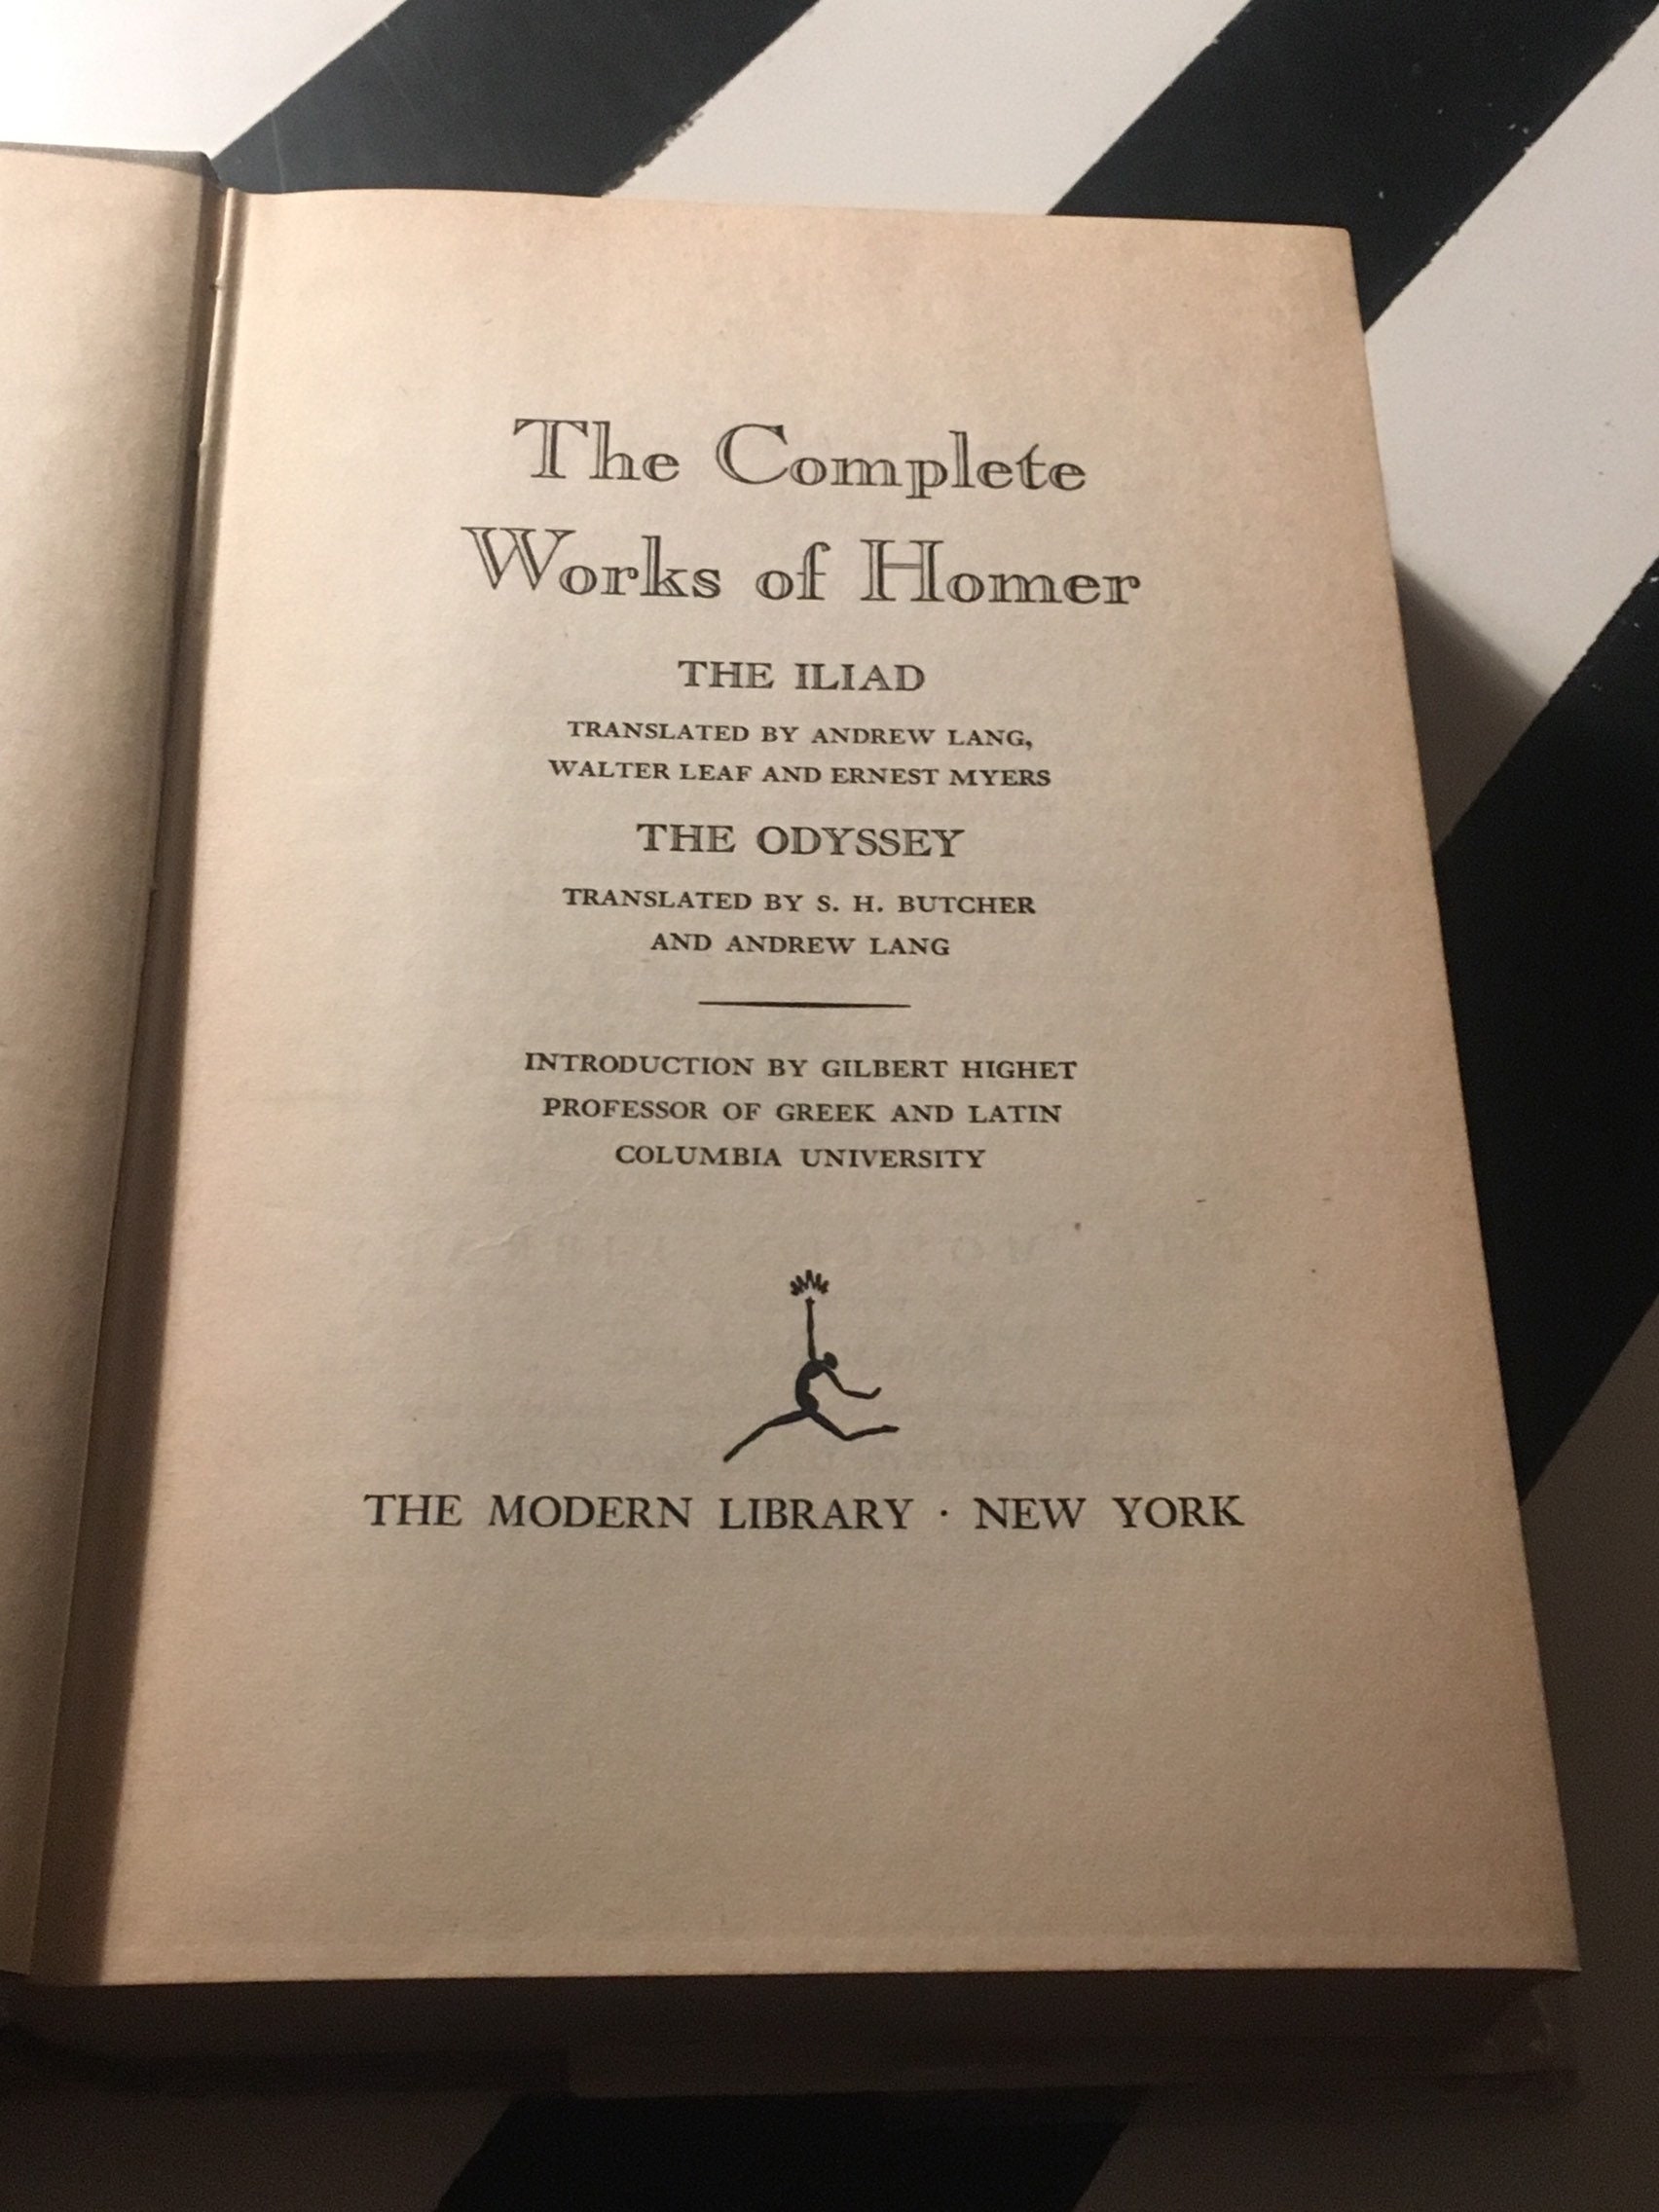 The Complete Works of Homer:The Iliad and The Odyssey ( 1950) hardcover ...